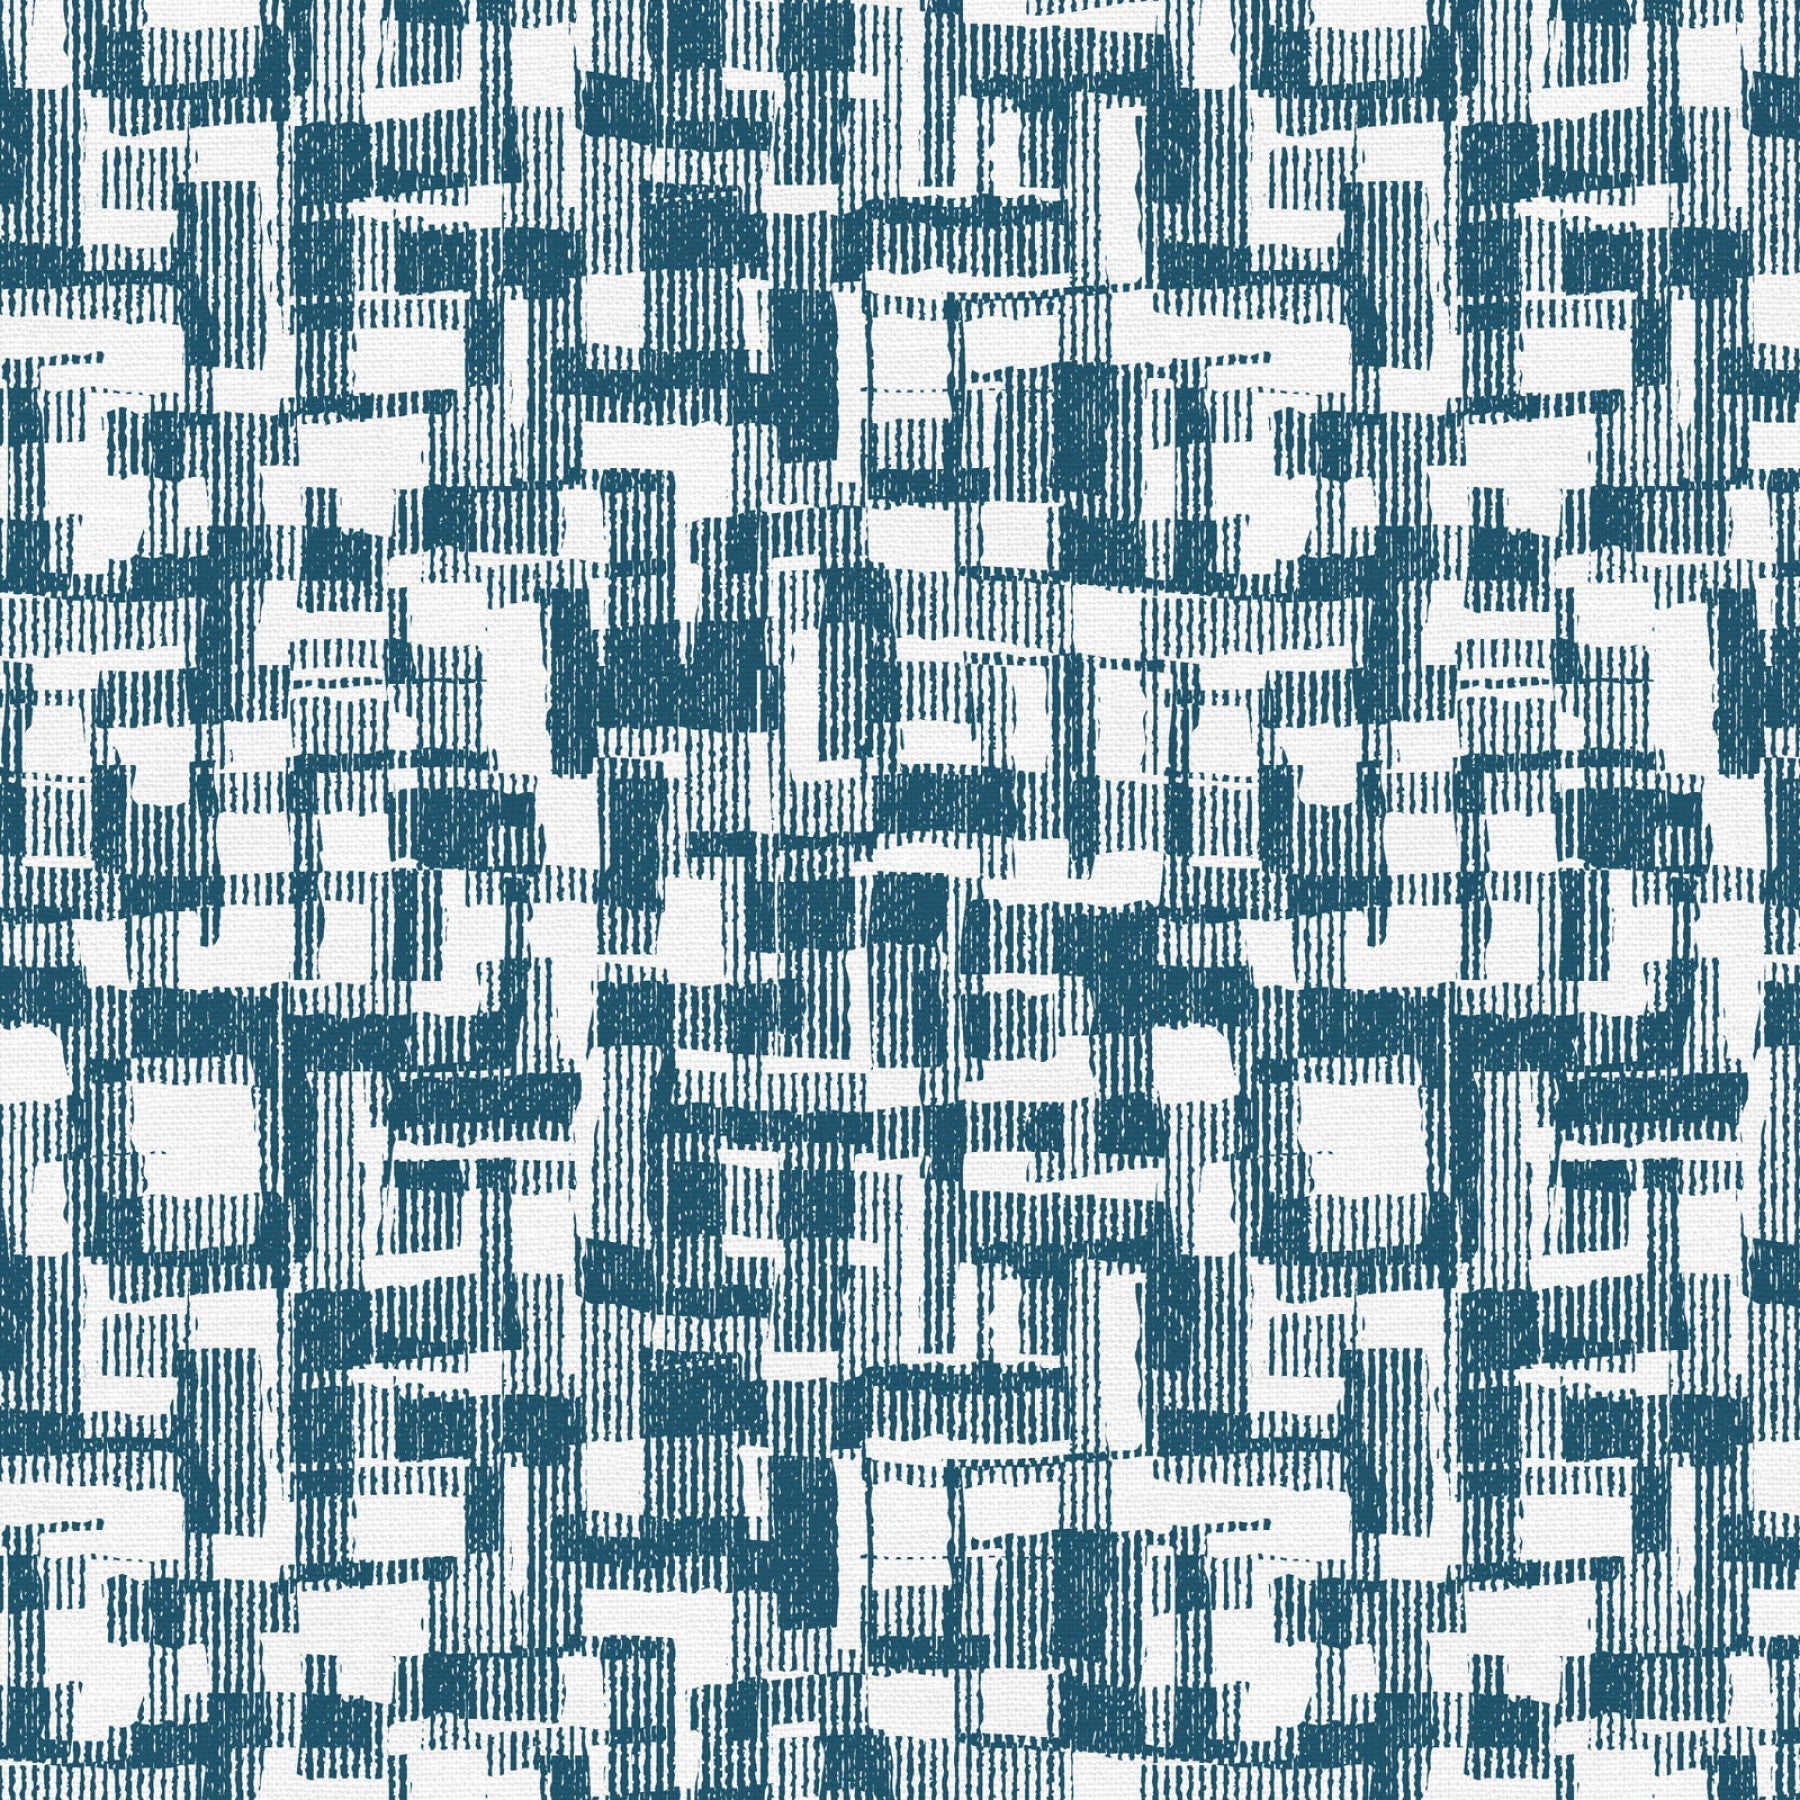 Blue Teal Barcodes Cotton Wideback Fabric